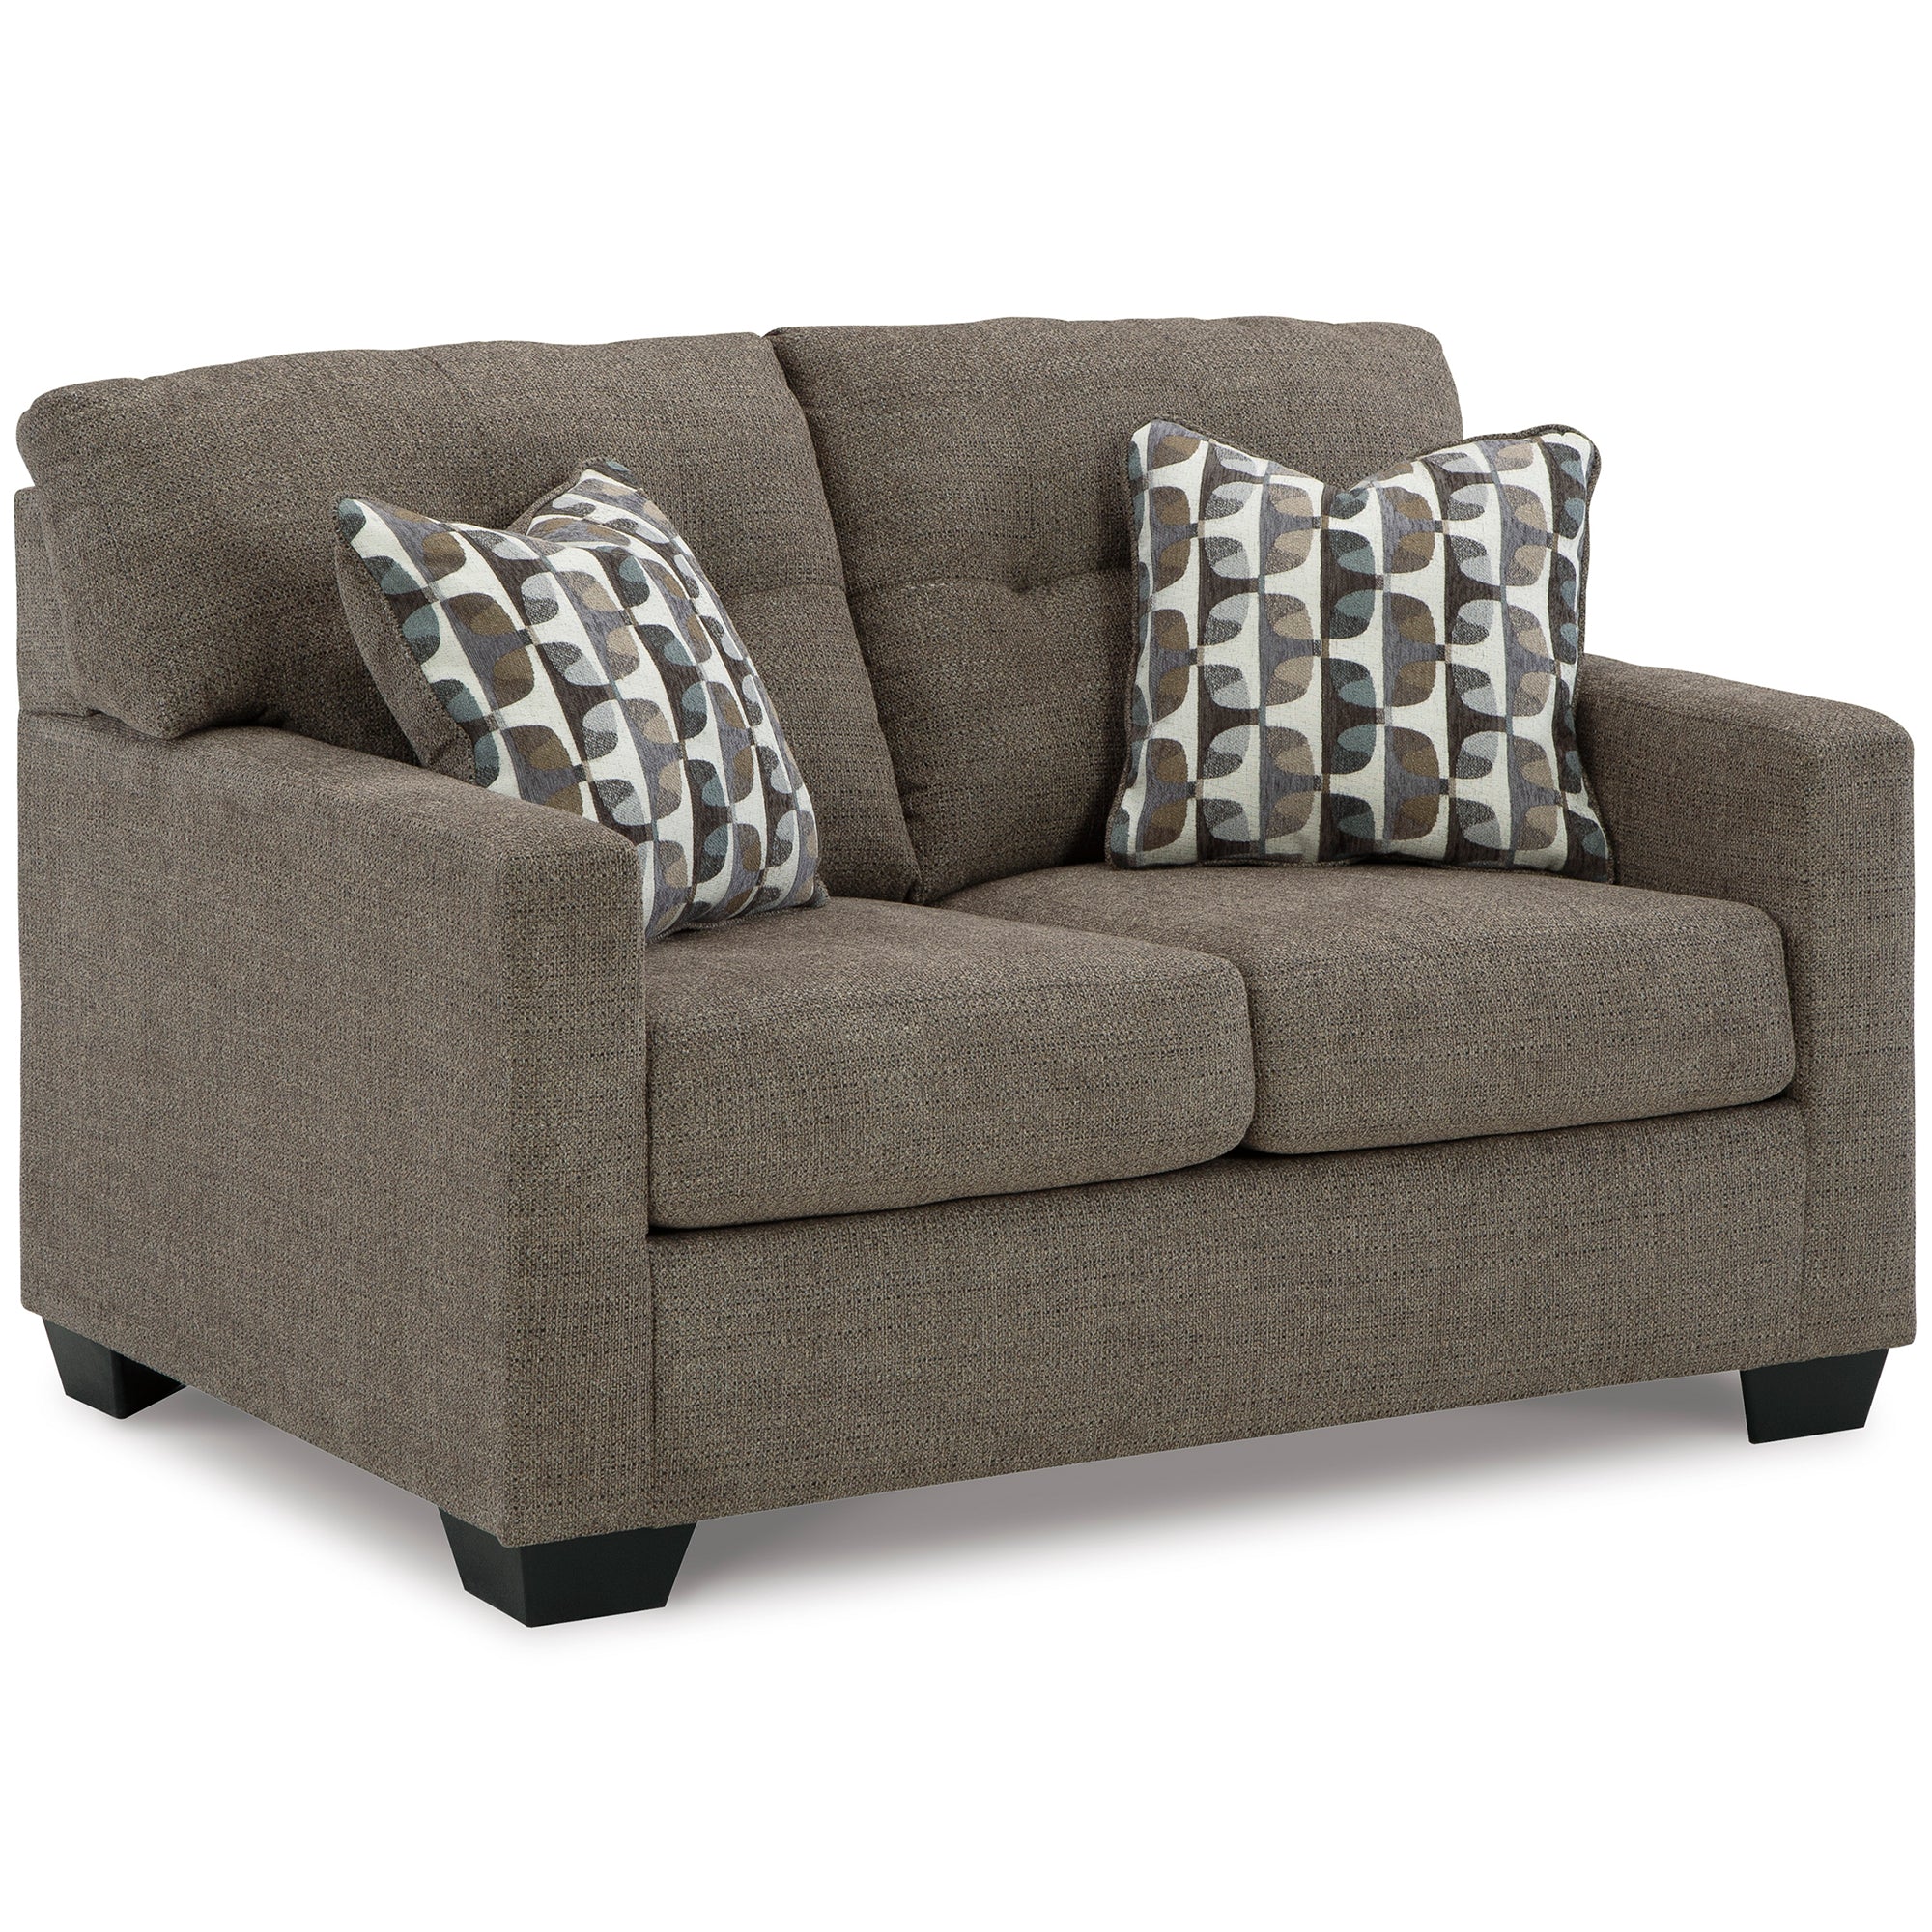 Compact and luxurious Mahoney Loveseat in chocolate, great for adding warmth to any room